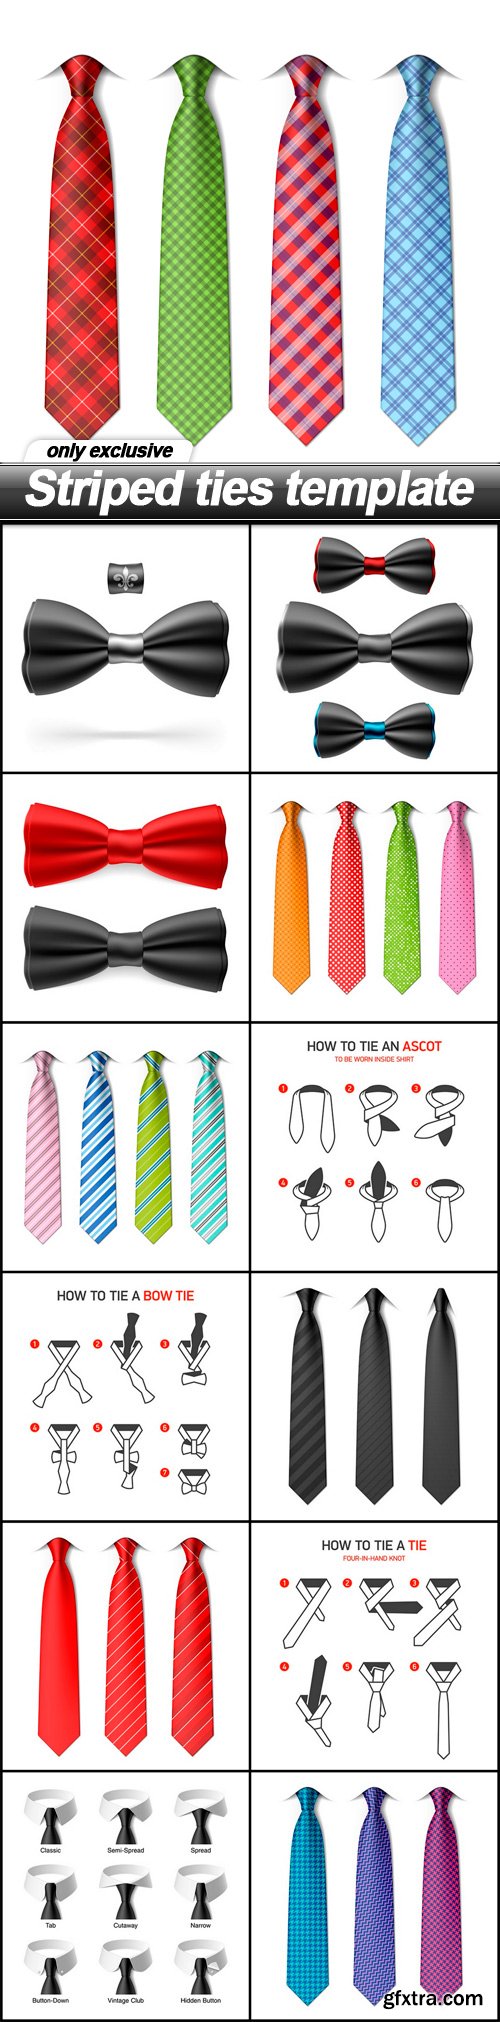 Striped ties template - 13 EPS